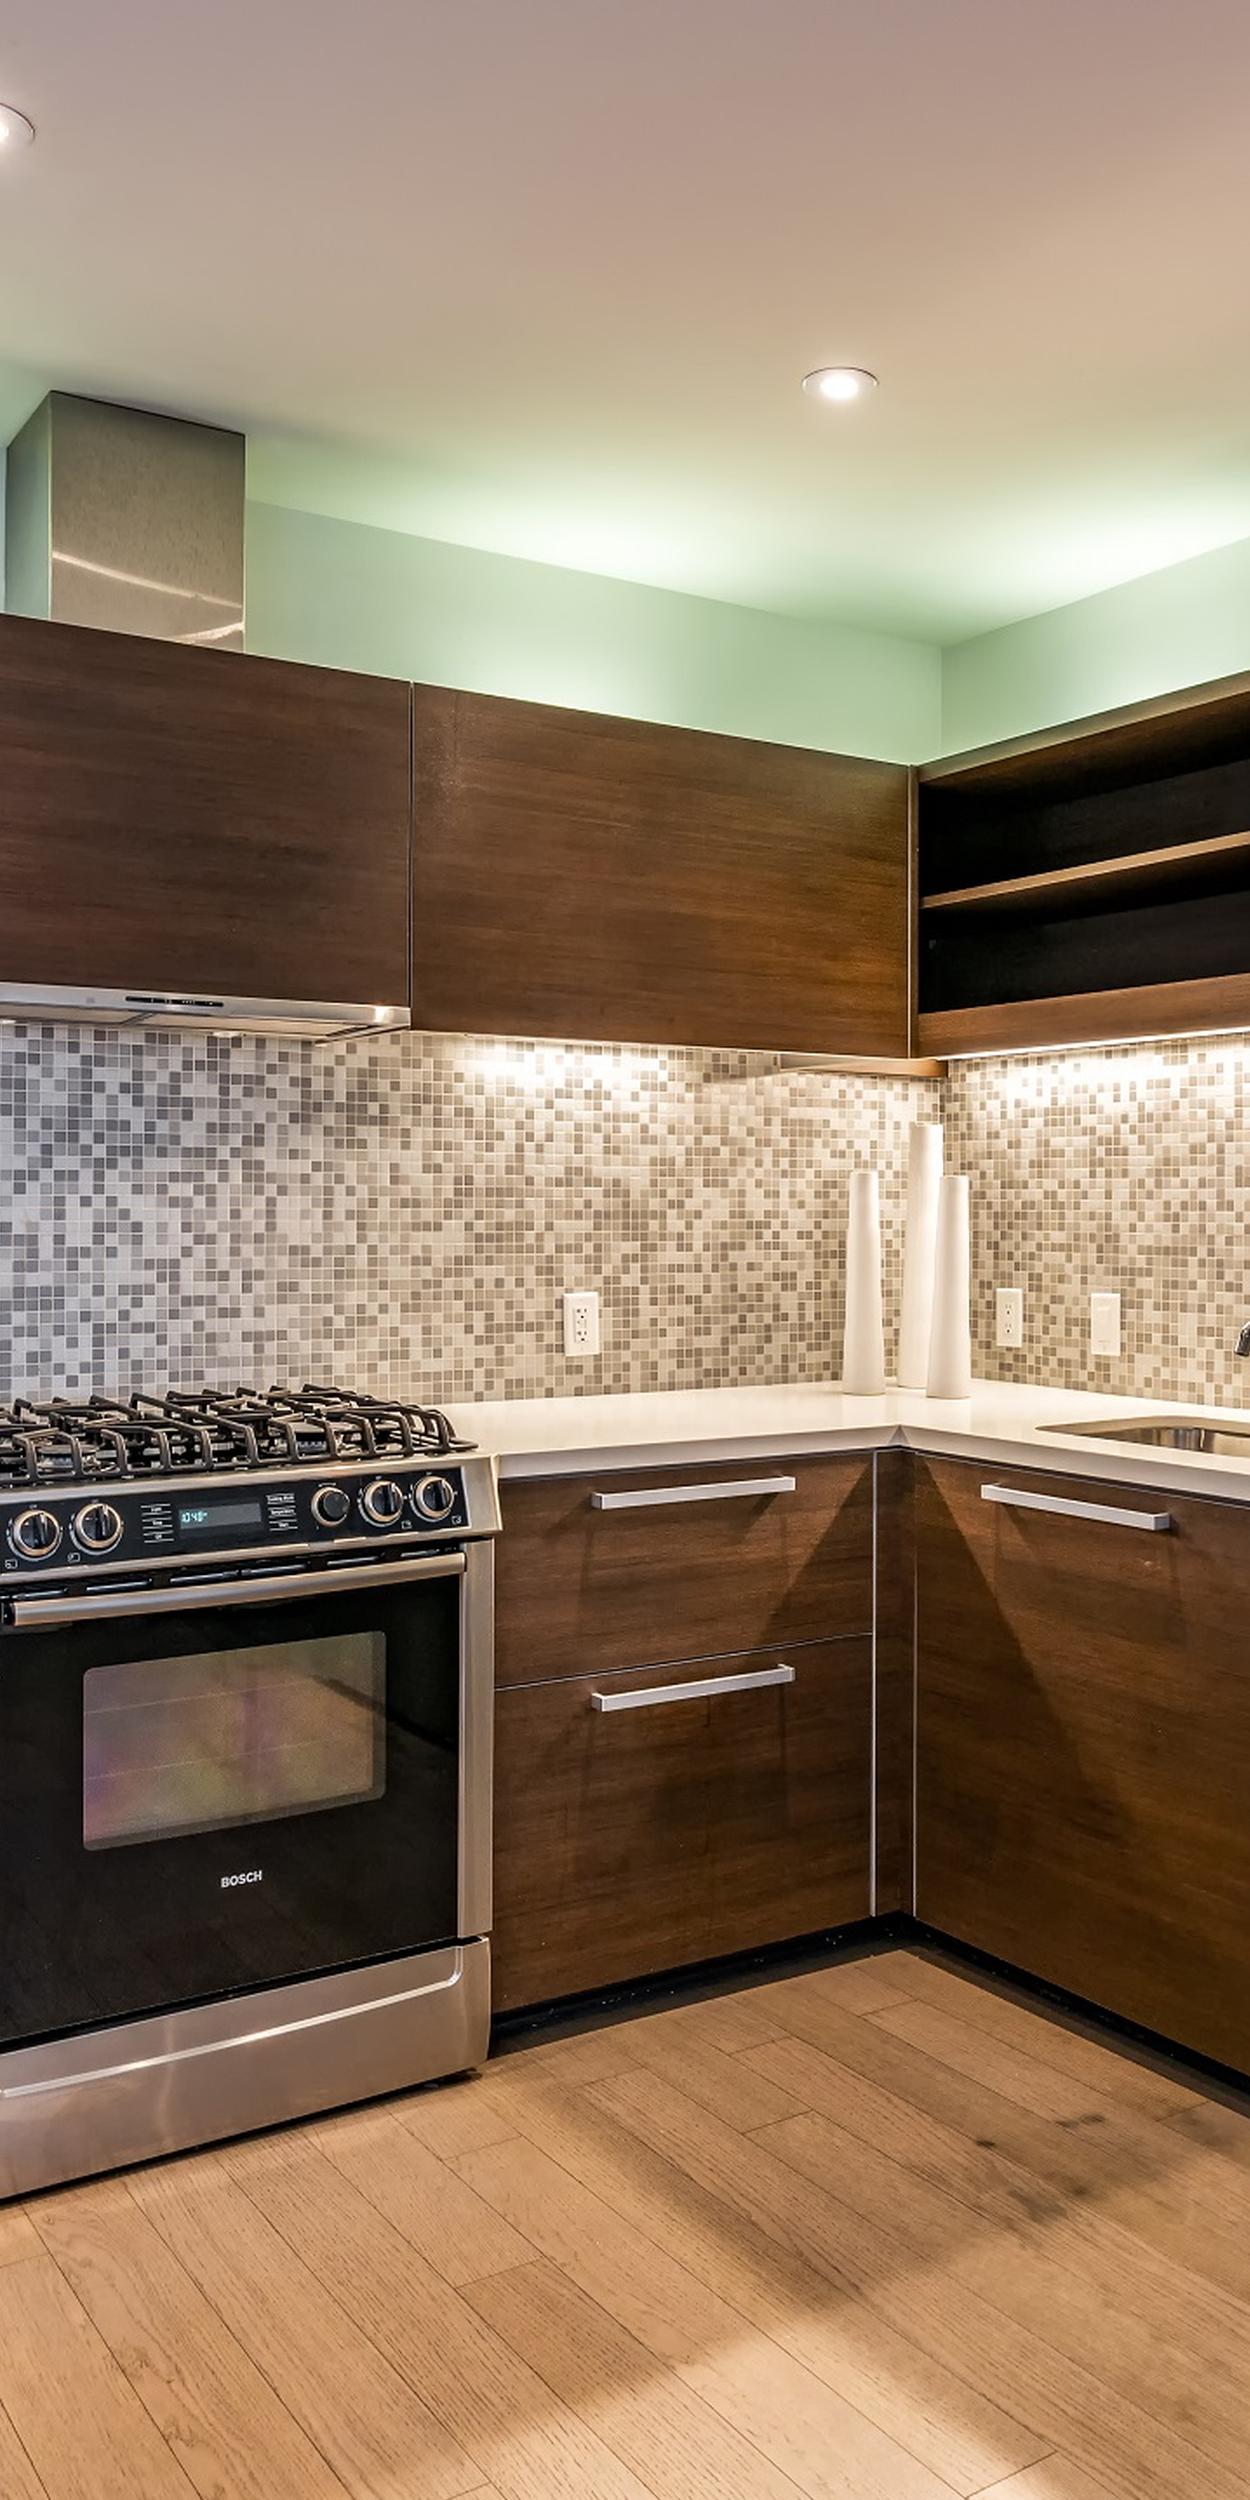 Berkeley, CA Apartments for Rent - Kitchen with Mosaic Tile Backsplash, Stainless Steel Appliances and Wood Flooring.